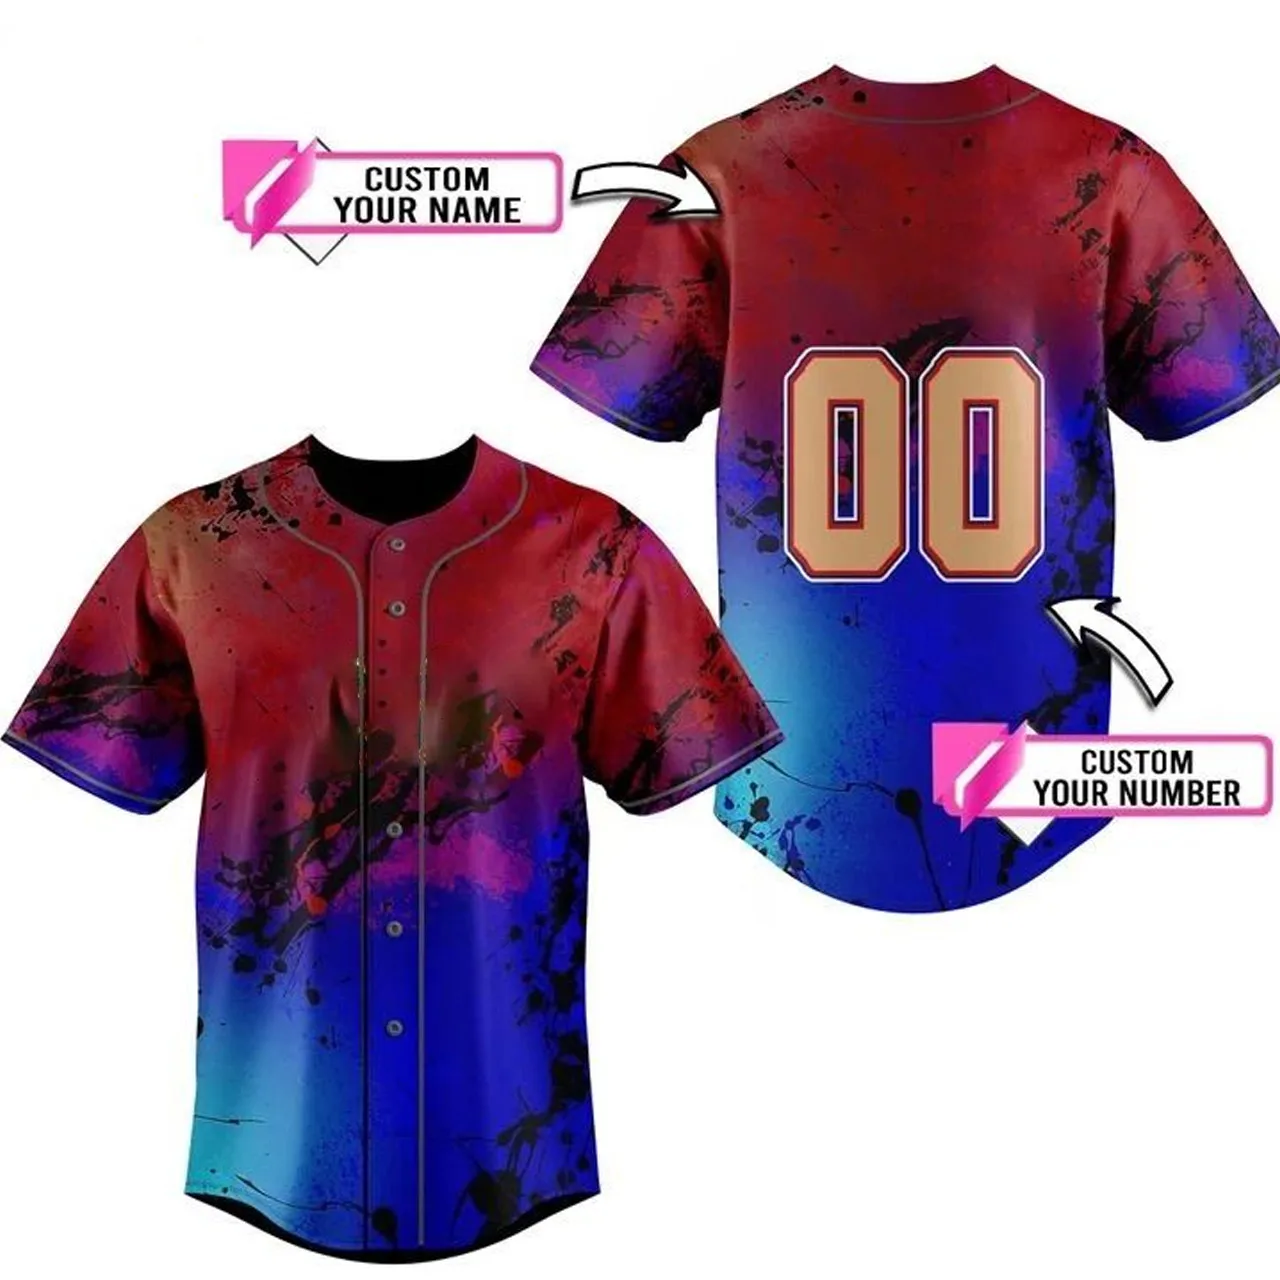 Wholesale Custom Order Baseball Jersey Latest Style Fast Shipping Red  Sublimation Baseball Uniforms From m.